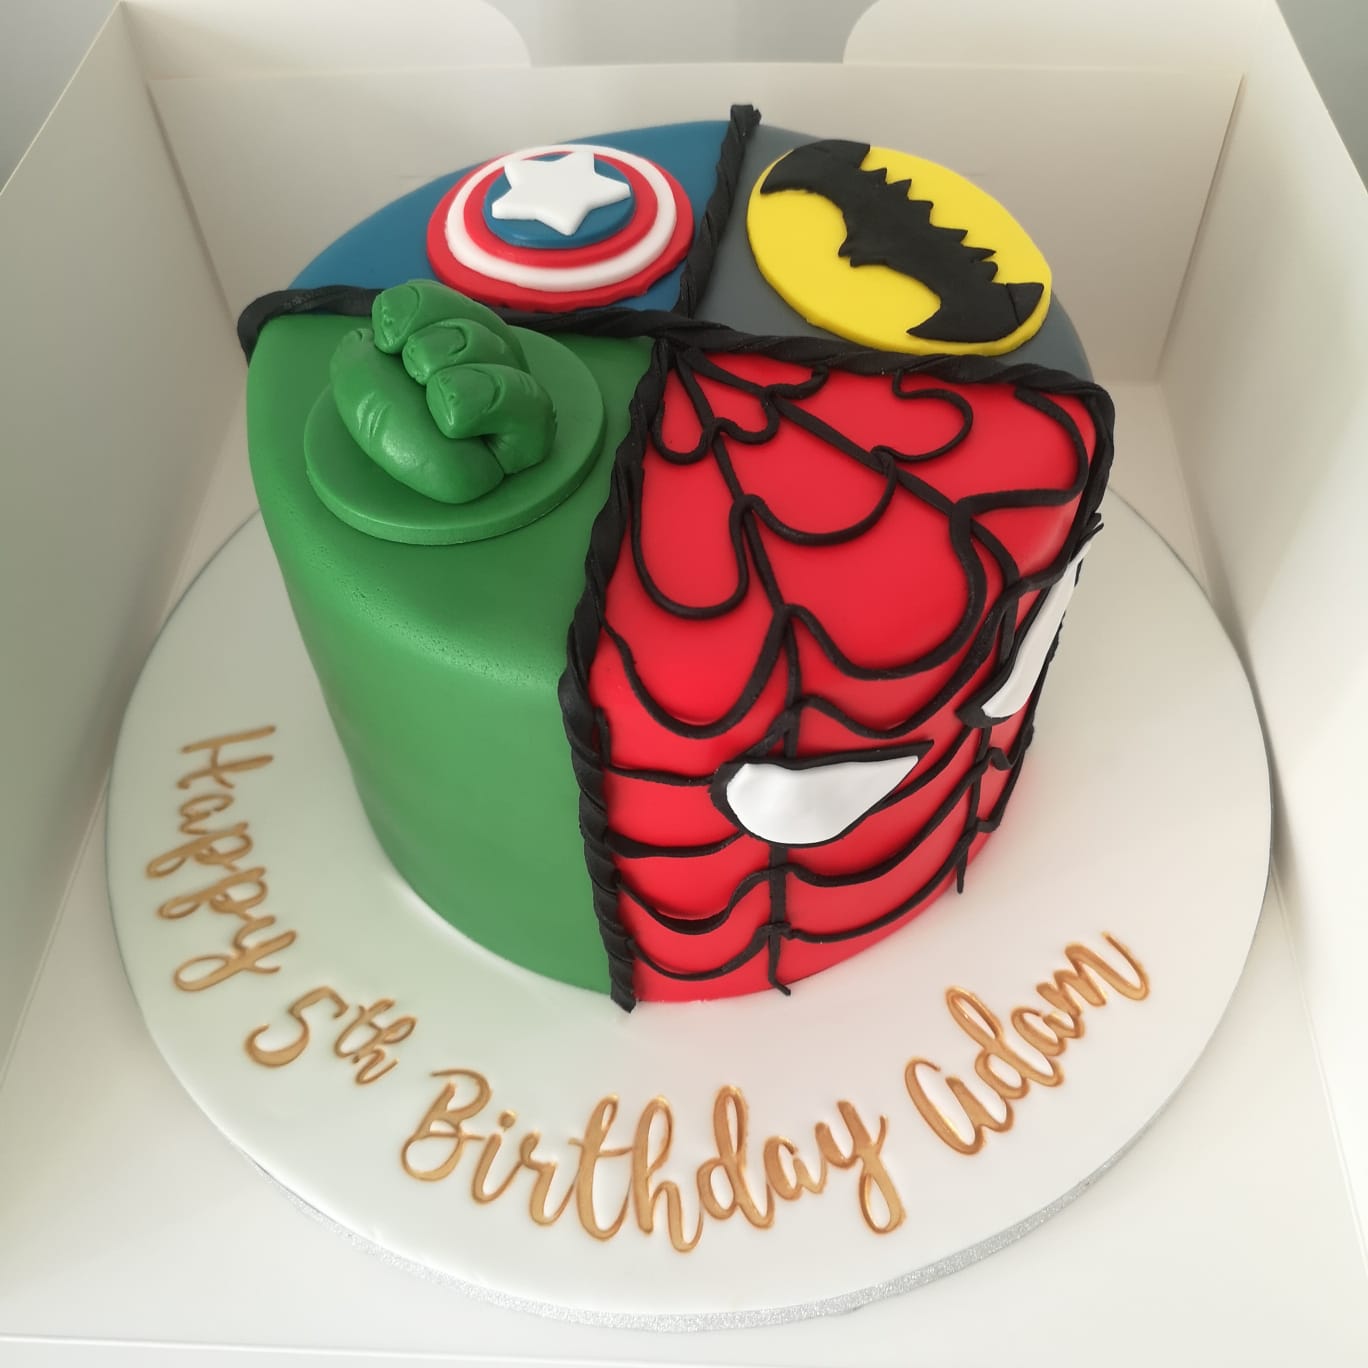 Avengers Character Cake – The Cake People